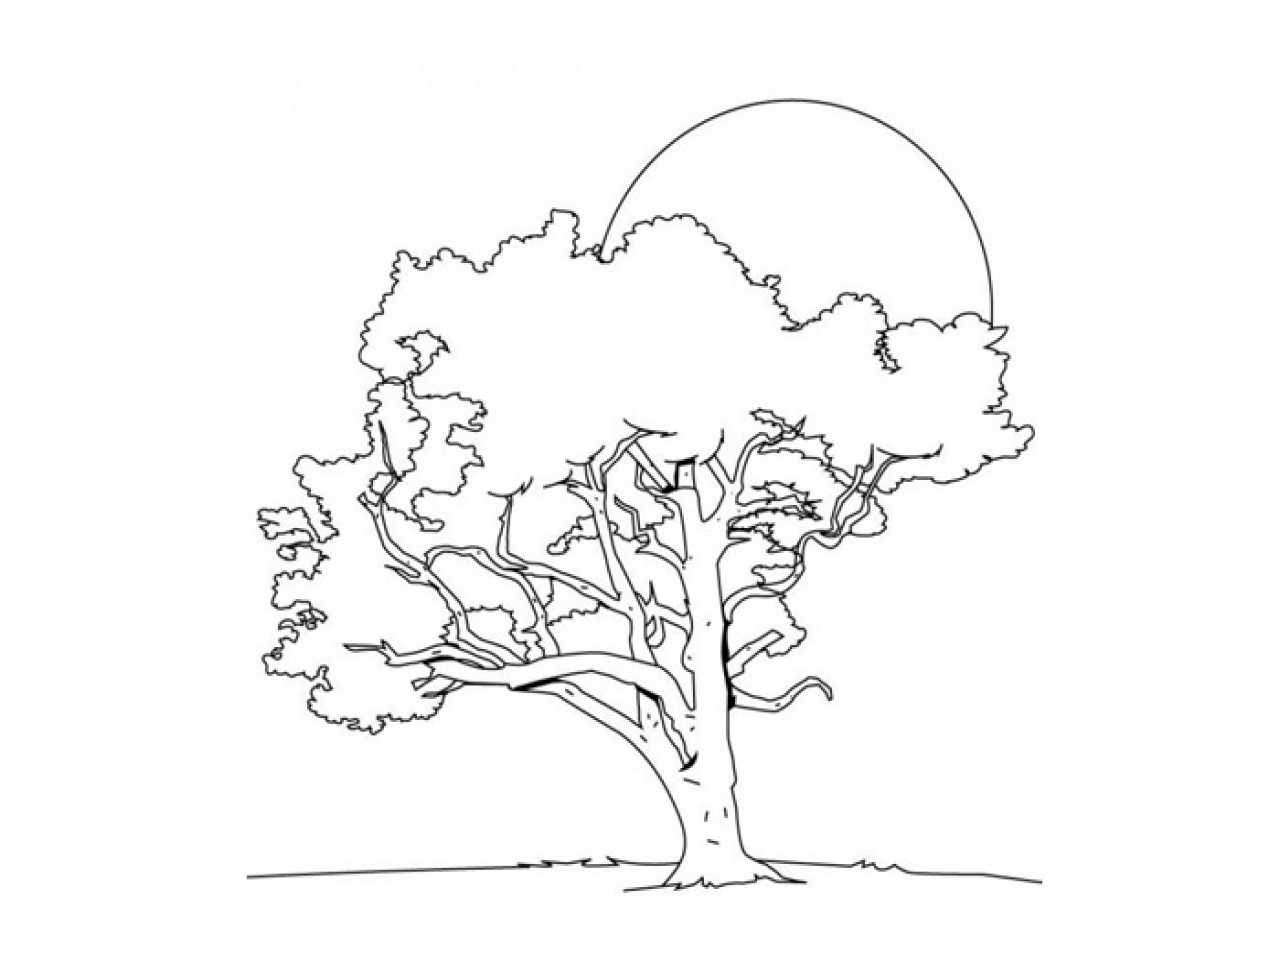 Cartoon Tree Coloring, ohio state tree coloring page. Coloring ...